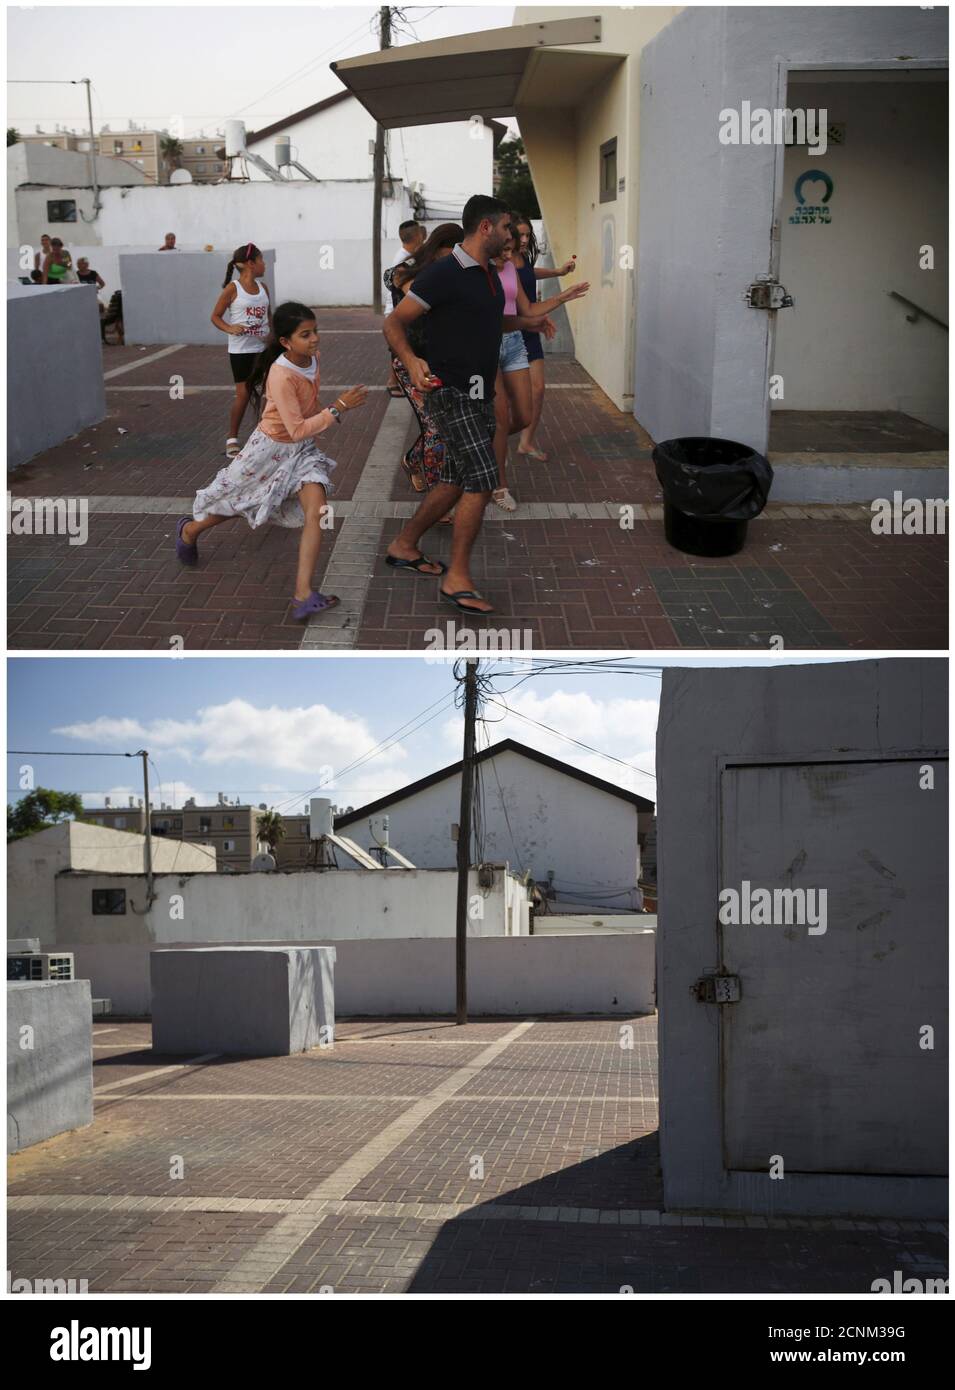 Israelis run towards a bomb shelter as a siren warning of incoming rockets sounds in the southern city of Ashkelon, Israel, July 9, 2014 (top) and the same place July 7, 2015. July 8th marks the one-year anniversary of the war between Israel and Hamas in Gaza. The 50-day conflict began after Israel said it was determined to put an end to constant rocket-fire from Gaza, launching an intense air and ground assault to do so. It was the third major conflict between Israel and Hamas militants since the Islamist group seized control of Gaza in 2007. The fighting killed more than 2,100 Palestinians,  Stock Photo